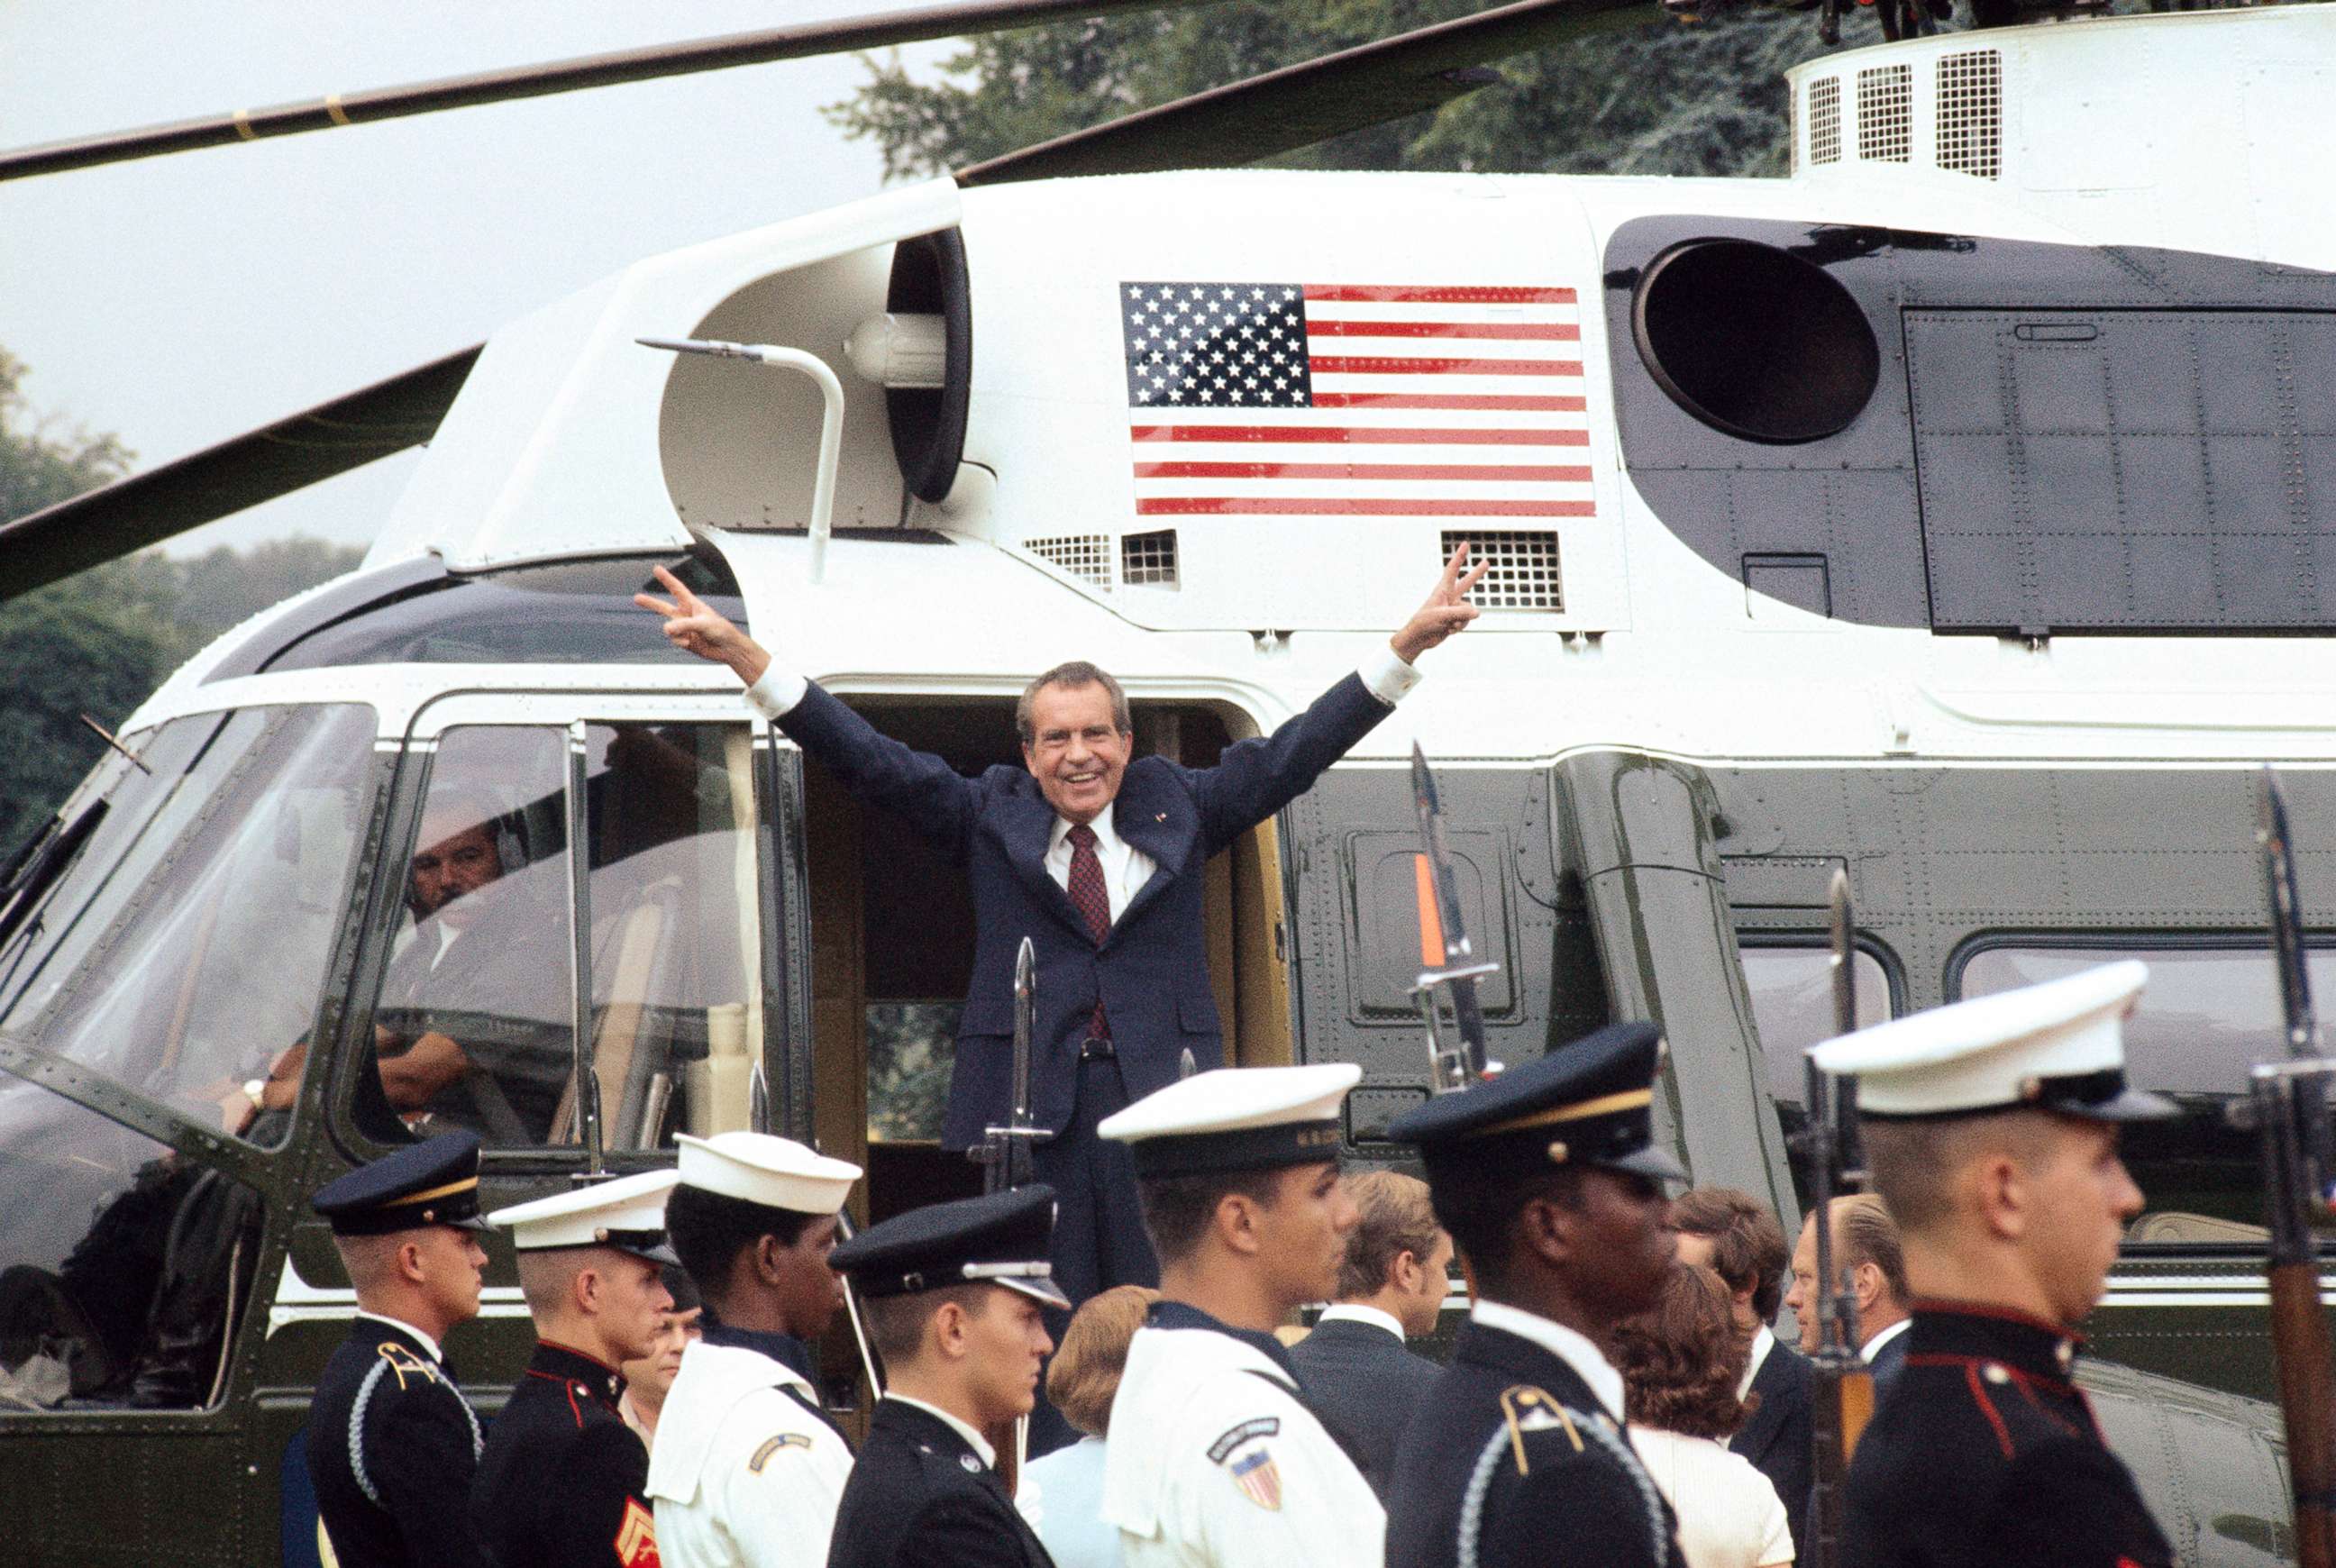 PHOTO: Richard Nixon smiles and gives the victory sign as he boards the White House helicopter after resigning the presidency, Aug. 9, 1974.